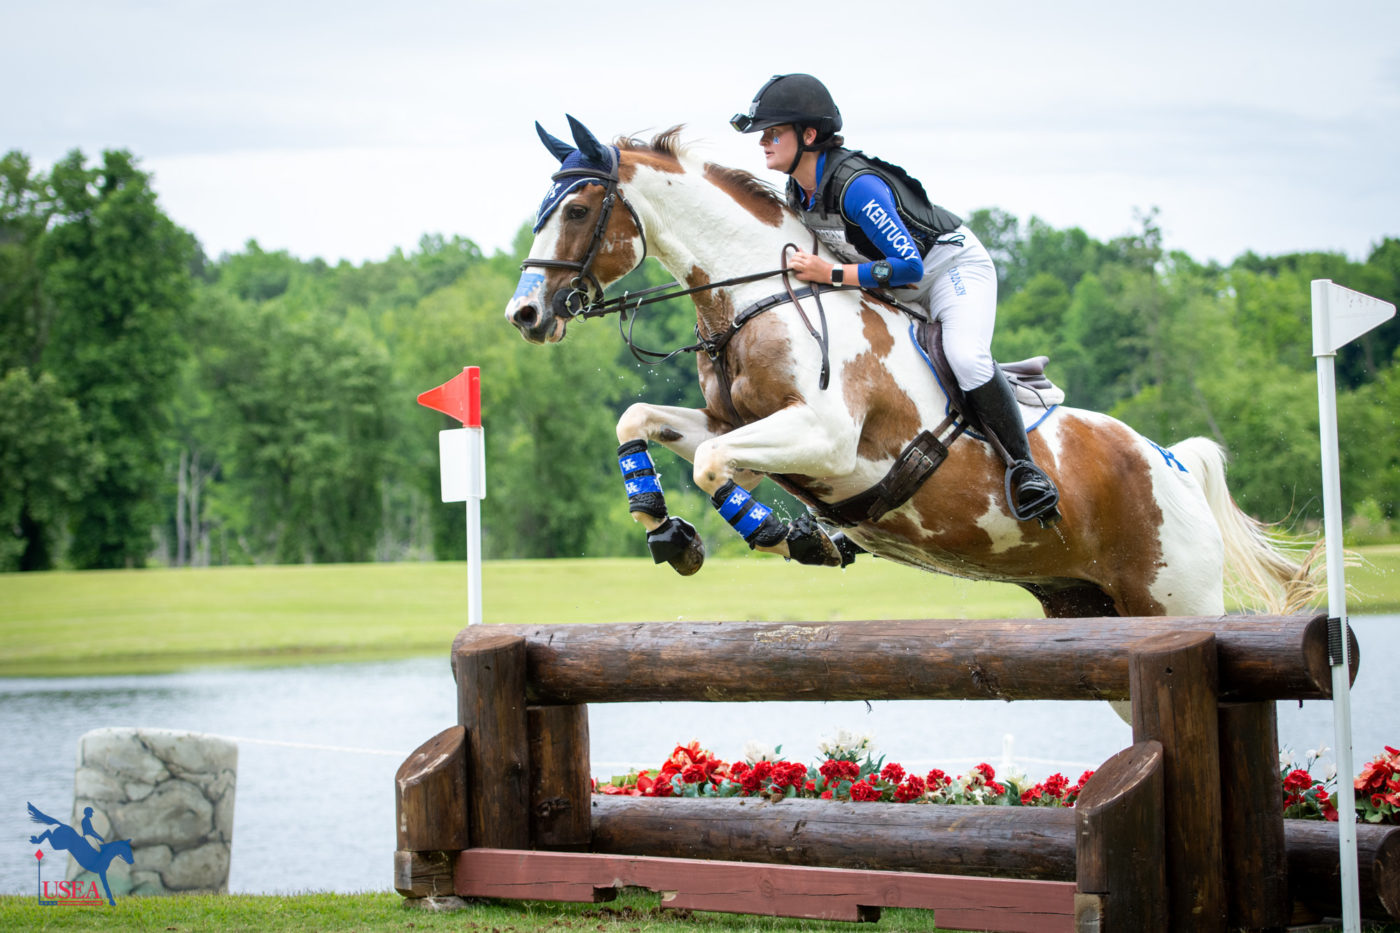 Ellie Teasley rode the colorful Quintessential for UK. USEA/Shelby Allen photo